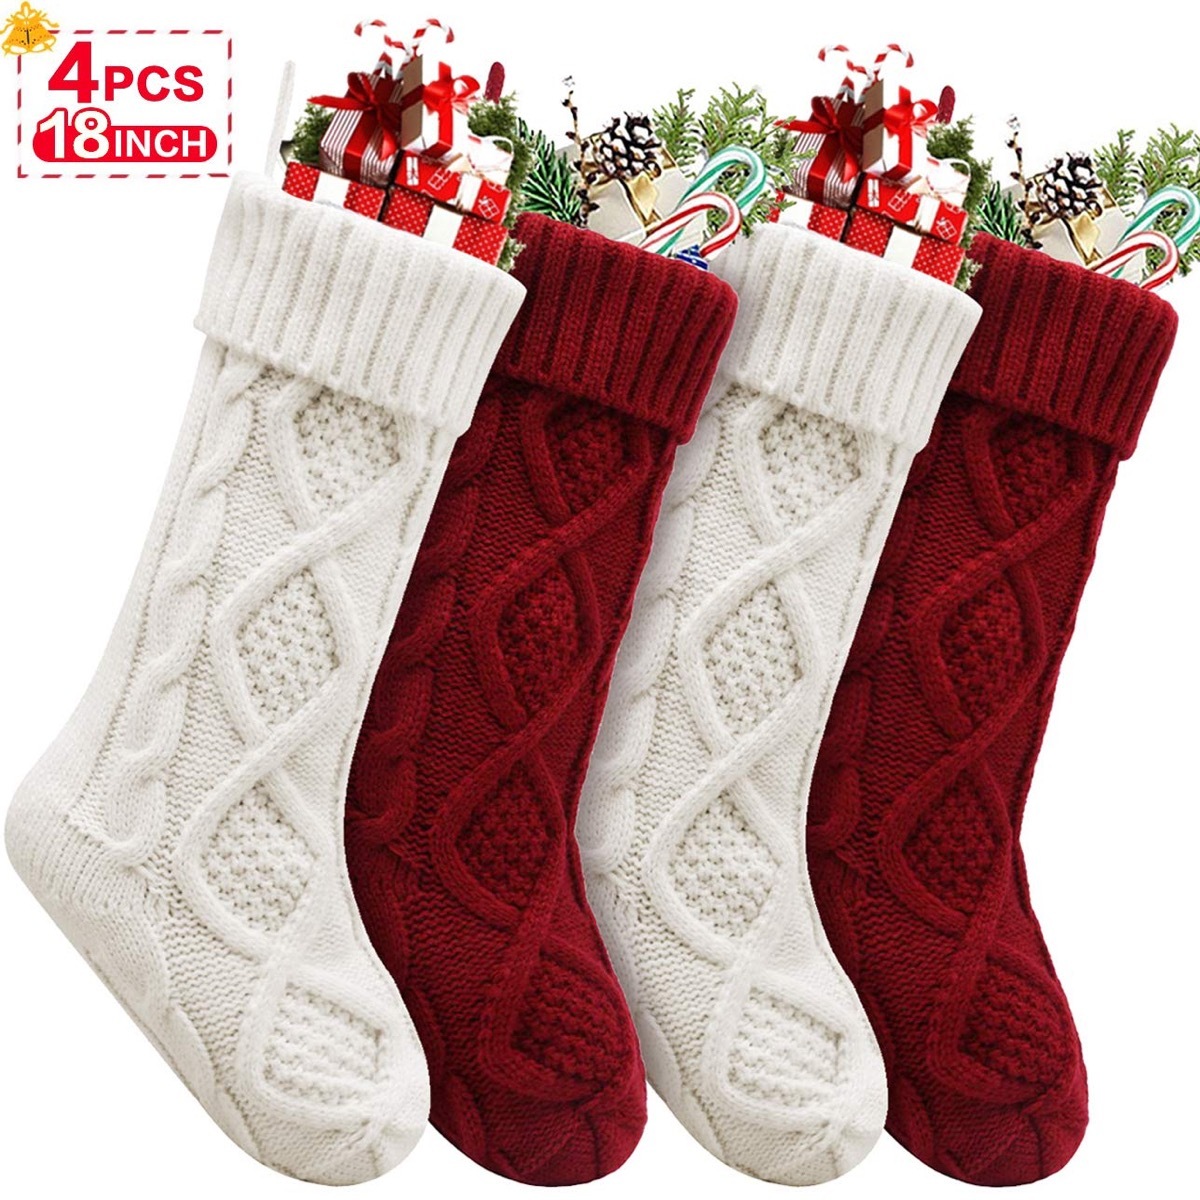 red and white cable knit stockings